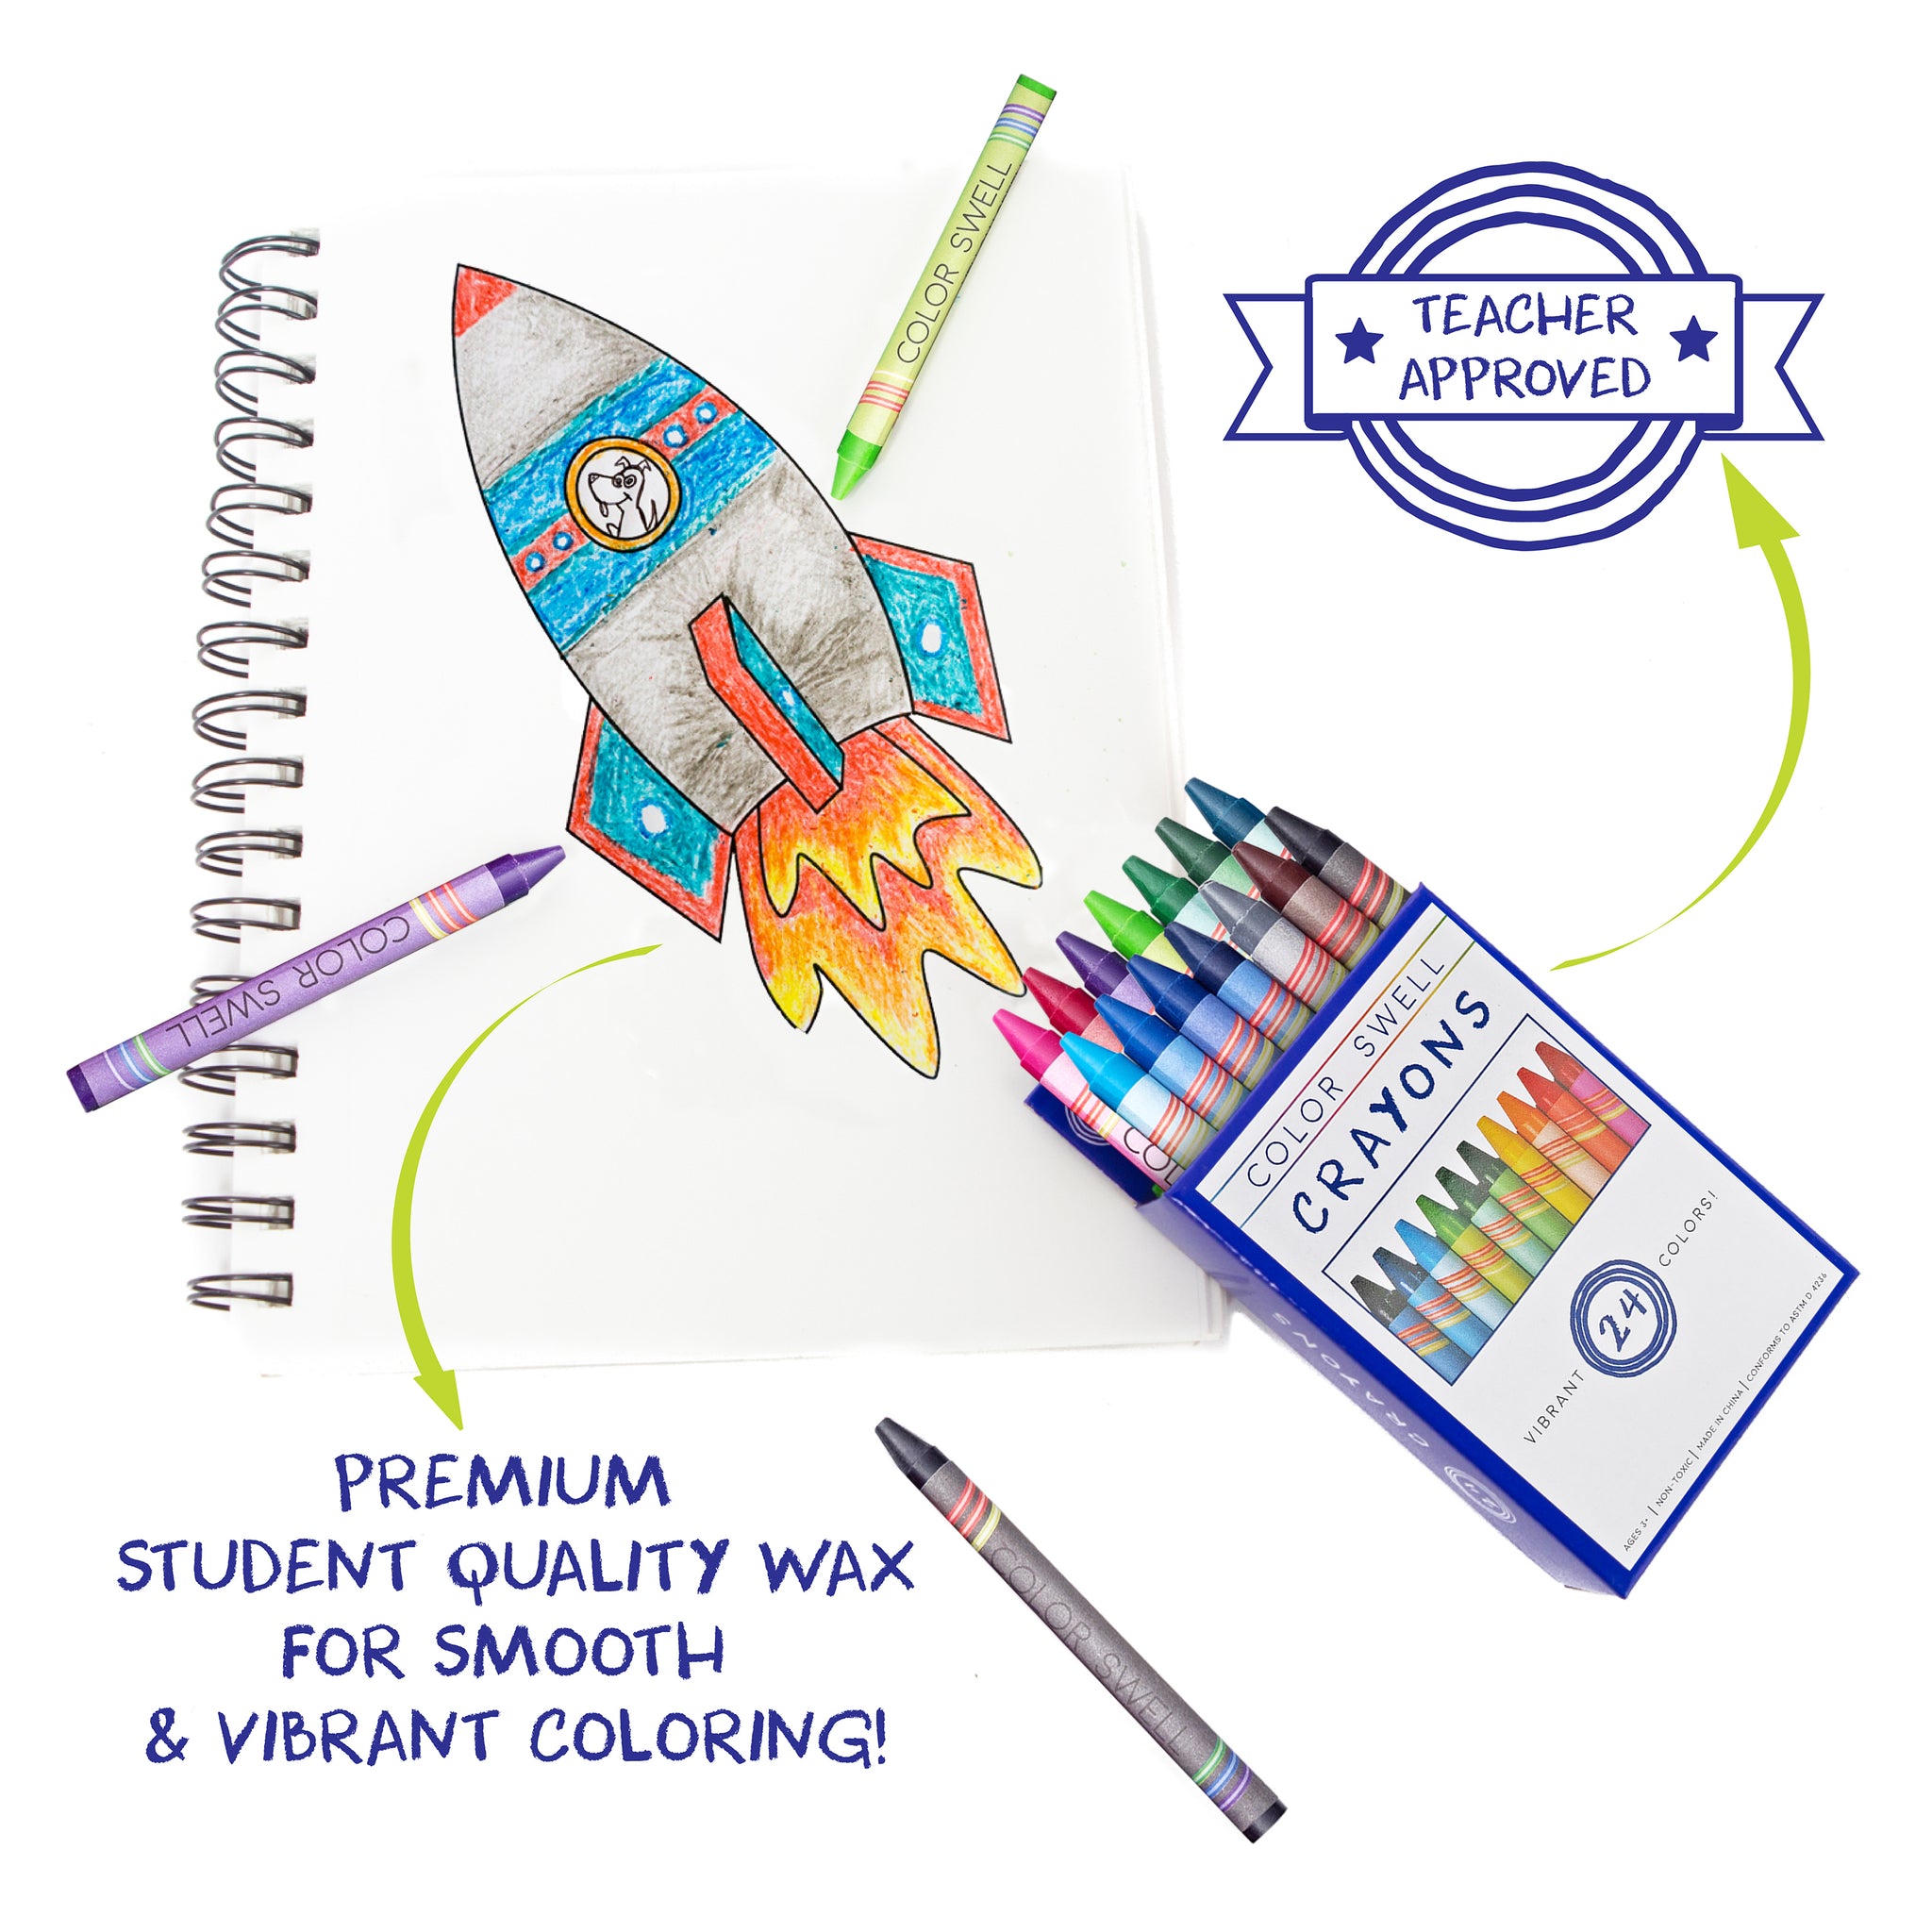 Buy Color Splash!® Crayons Box of 4 (Pack of 36) at S&S Worldwide